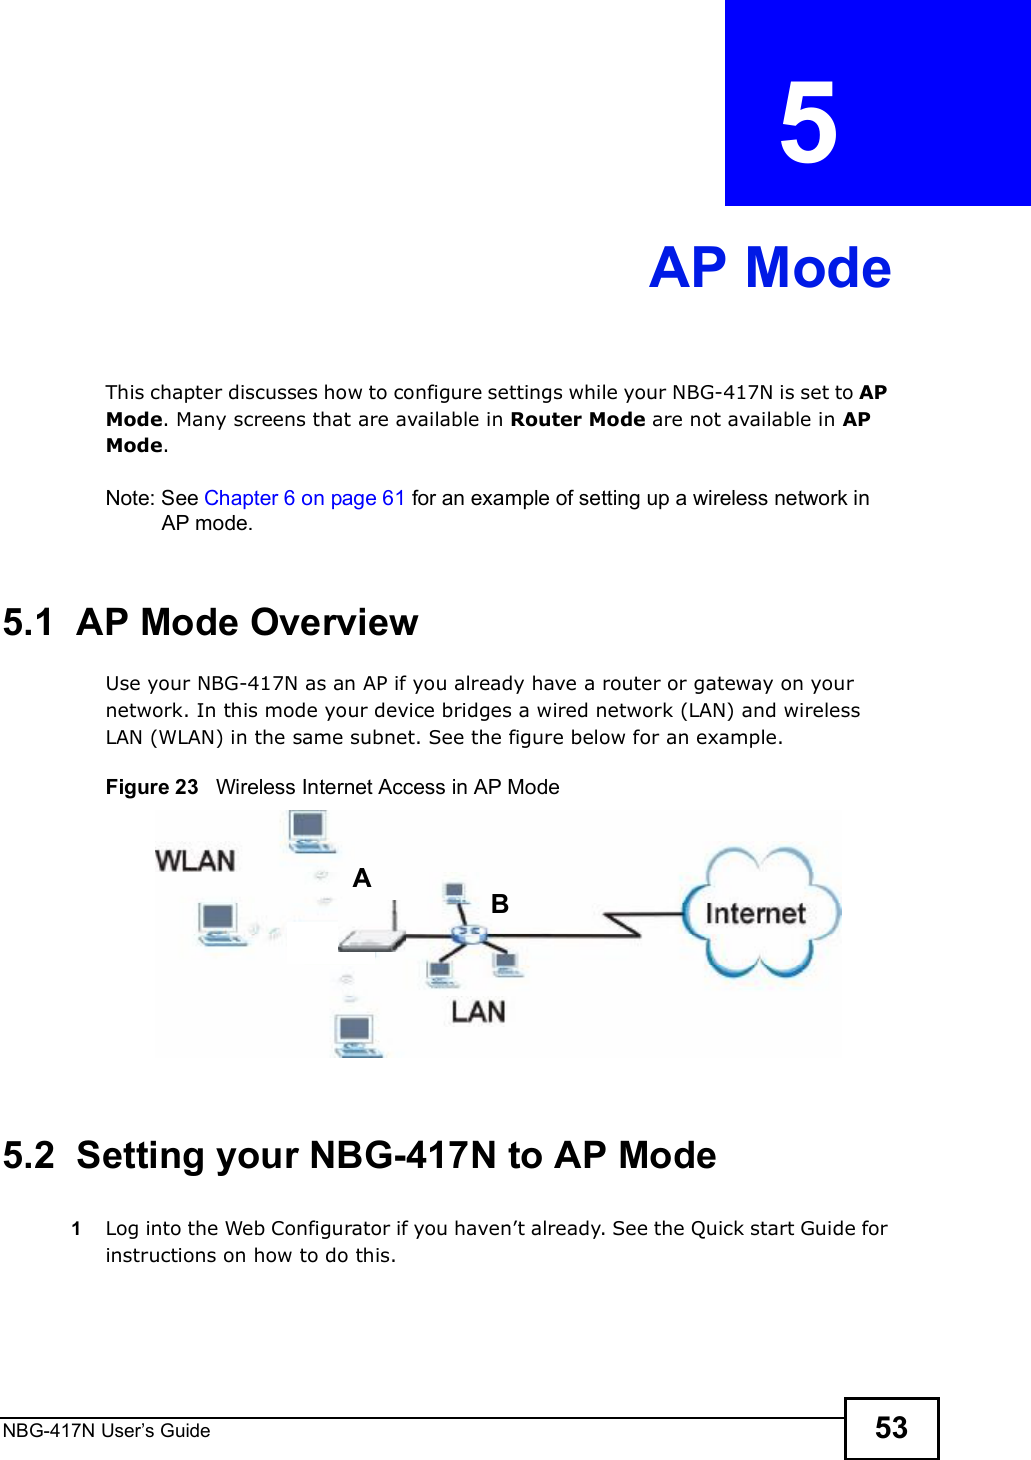 NBG-417N User s Guide 53CHAPTER  5 AP ModeThis chapter discusses how to configure settings while your NBG-417N is set to AP Mode. Many screens that are available in Router Mode are not available in AP Mode.Note: See Chapter 6 on page 61 for an example of setting up a wireless network in AP mode. 5.1  AP Mode OverviewUse your NBG-417N as an AP if you already have a router or gateway on your network. In this mode your device bridges a wired network (LAN) and wireless LAN (WLAN) in the same subnet. See the figure below for an example.Figure 23   Wireless Internet Access in AP Mode 5.2  Setting your NBG-417N to AP Mode1Log into the Web Configurator if you haven!t already. See the Quick start Guide for instructions on how to do this.AB